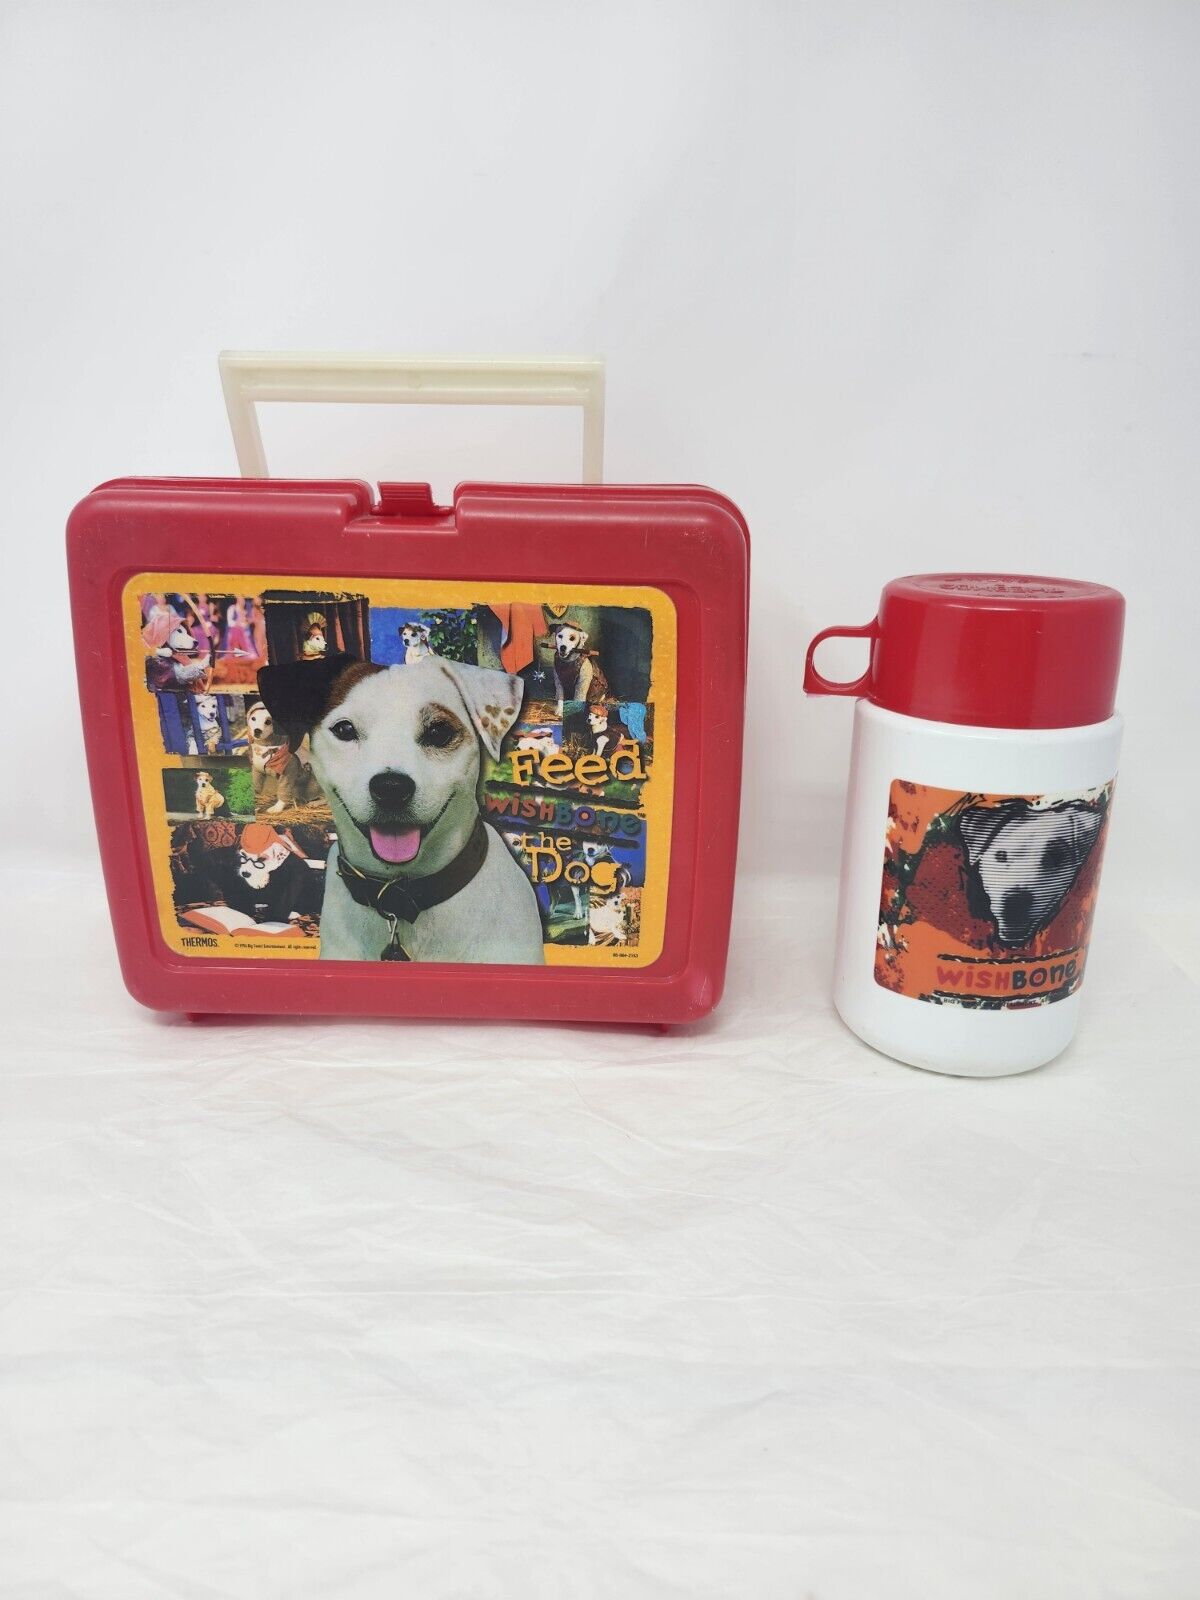 Vintage Thermos Brand Hard Lunchbox And Thermos “Wishbone” 1996 Made in the USA